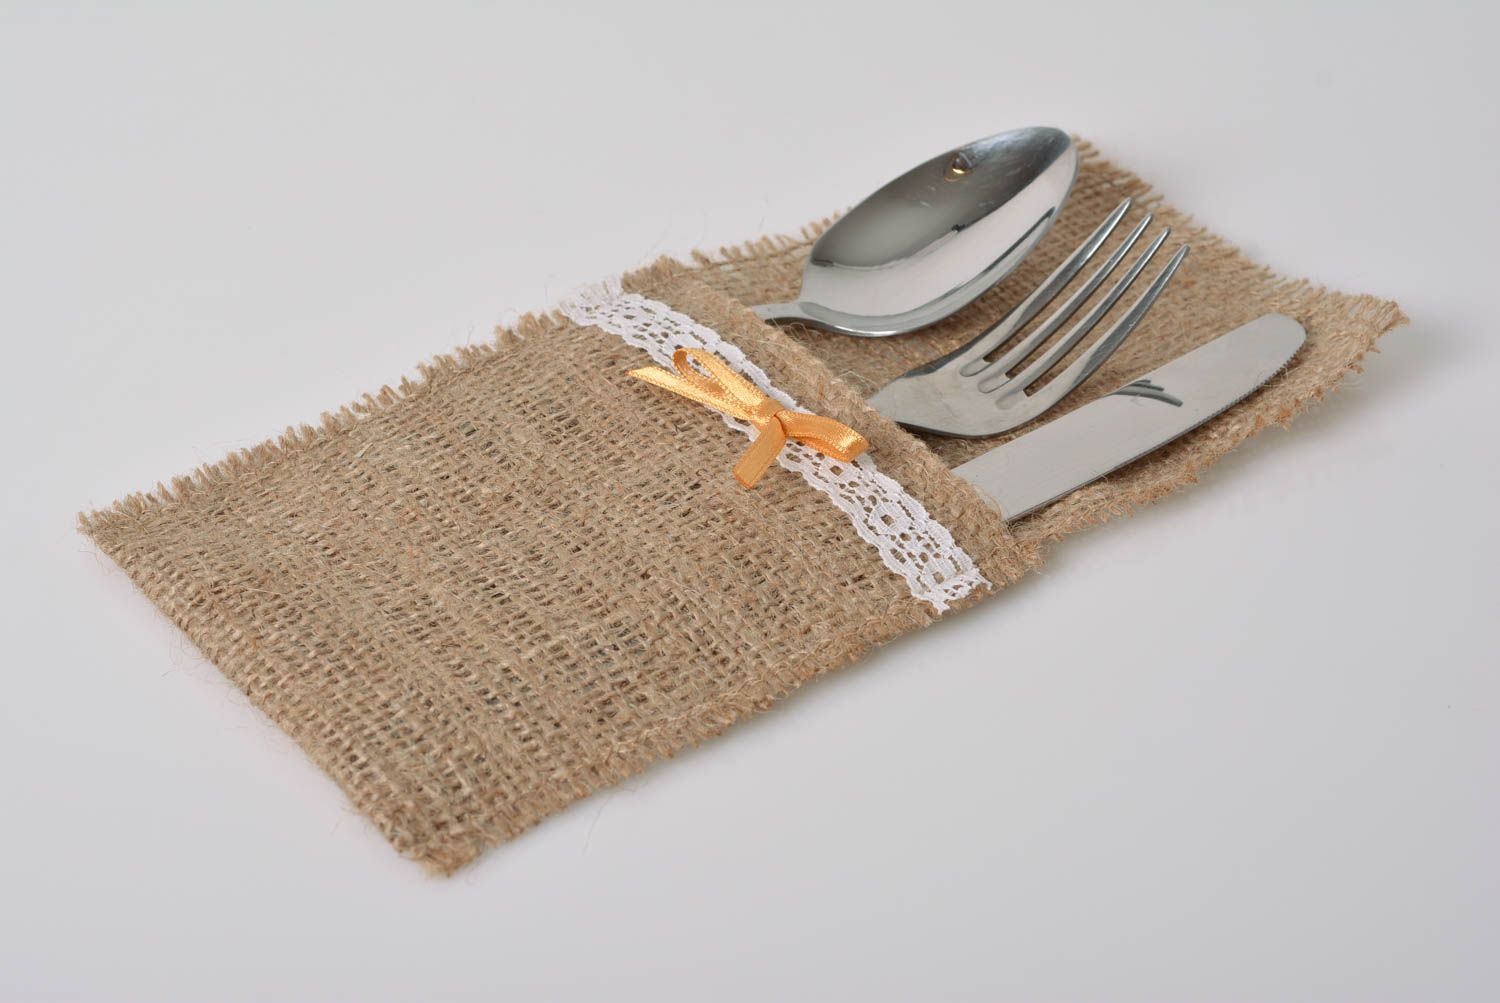 Case for cutlery made of burlap handmade beautiful kitchen decor photo 2